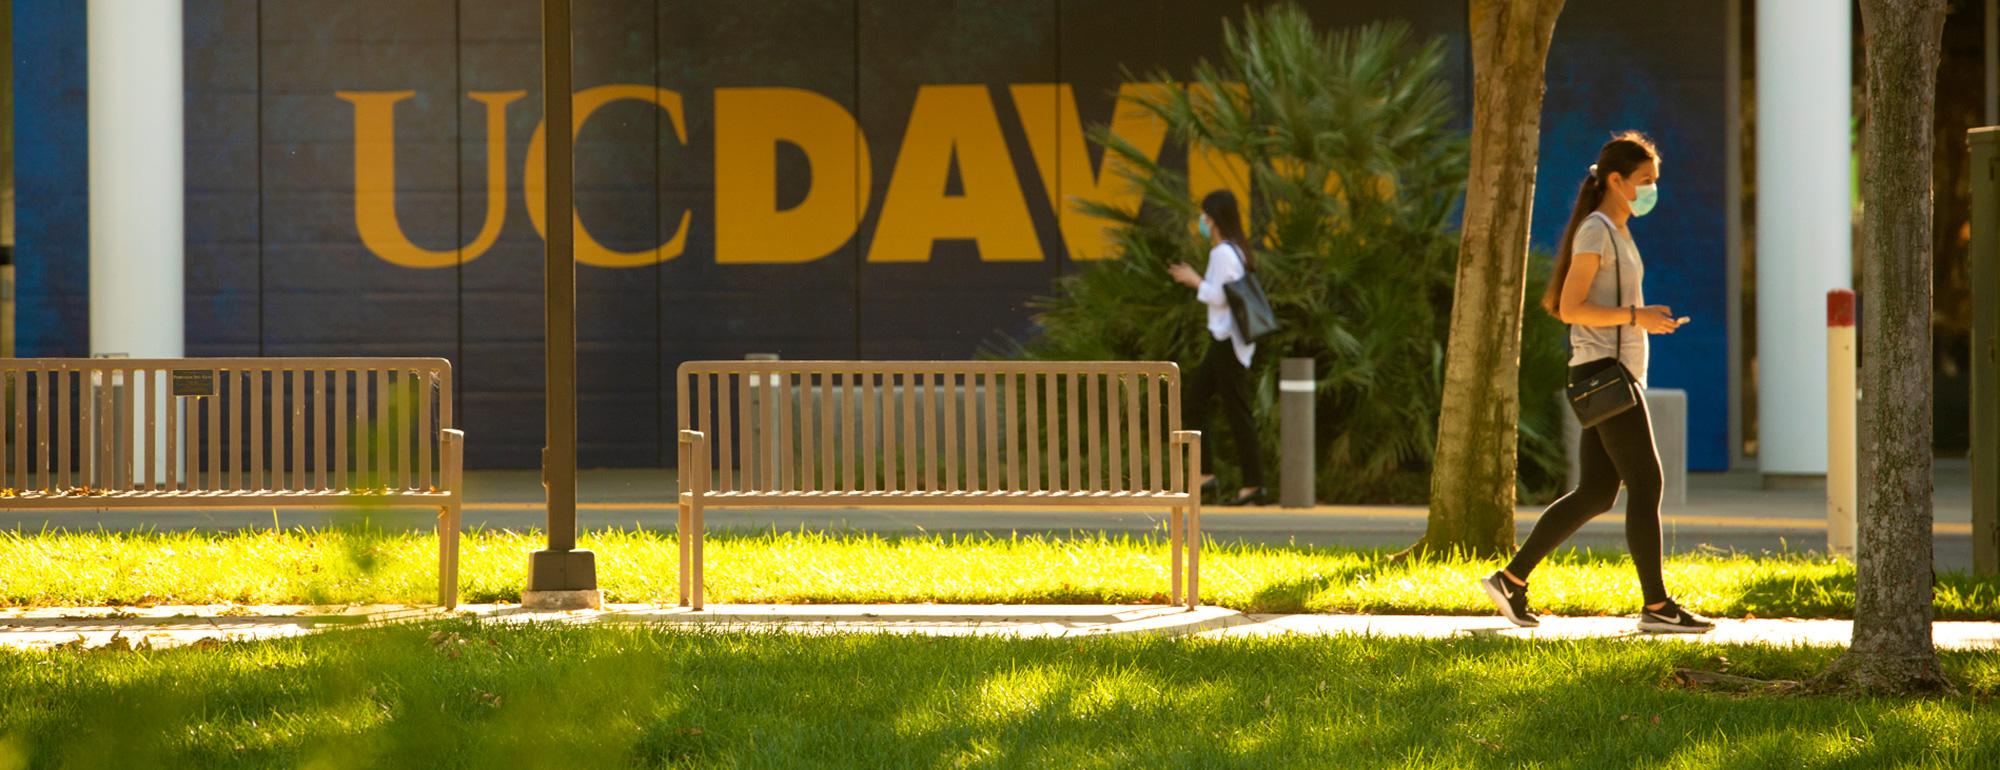 A student walking on campus. A large UC Davis logo on a building wall in the background.